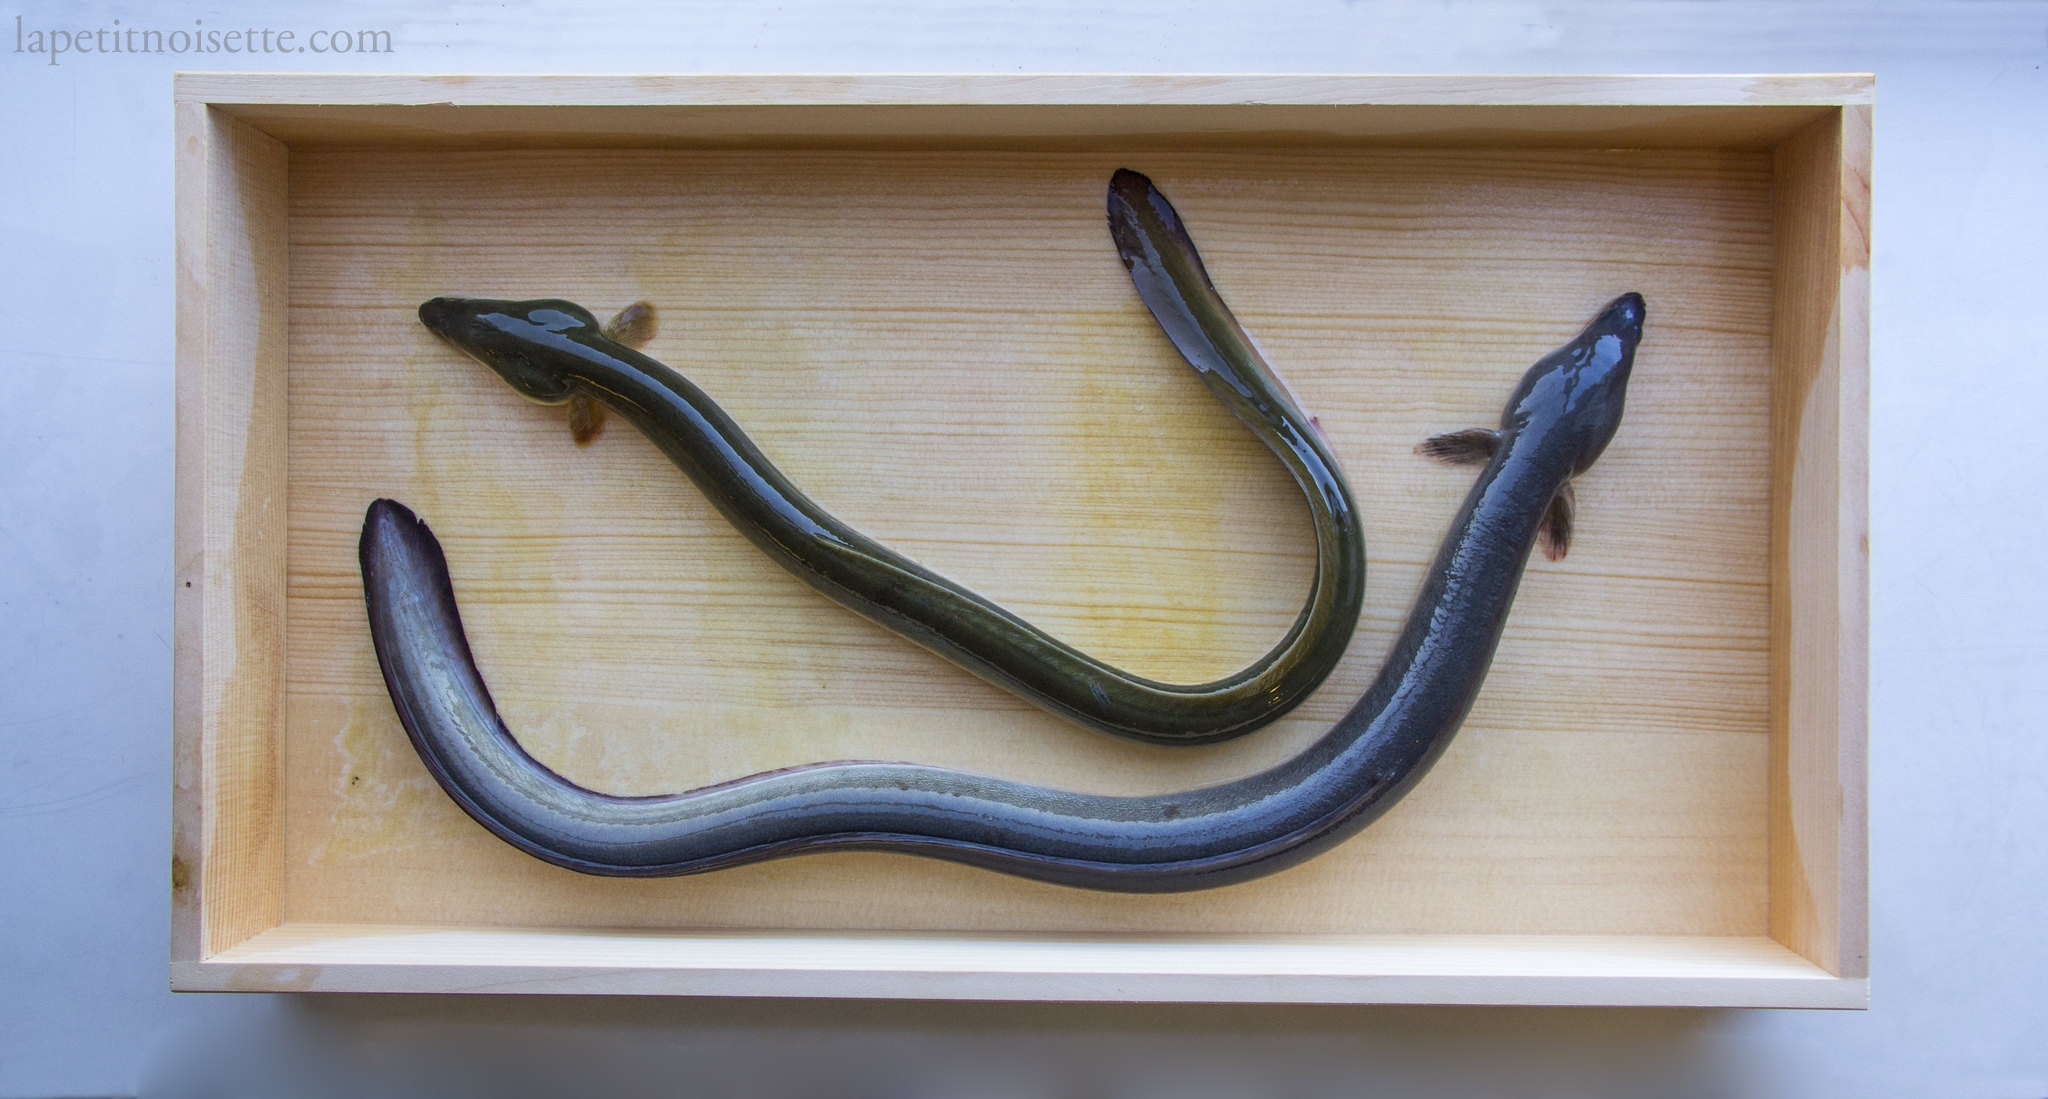 A wild eel in comparison to a farmed eel.